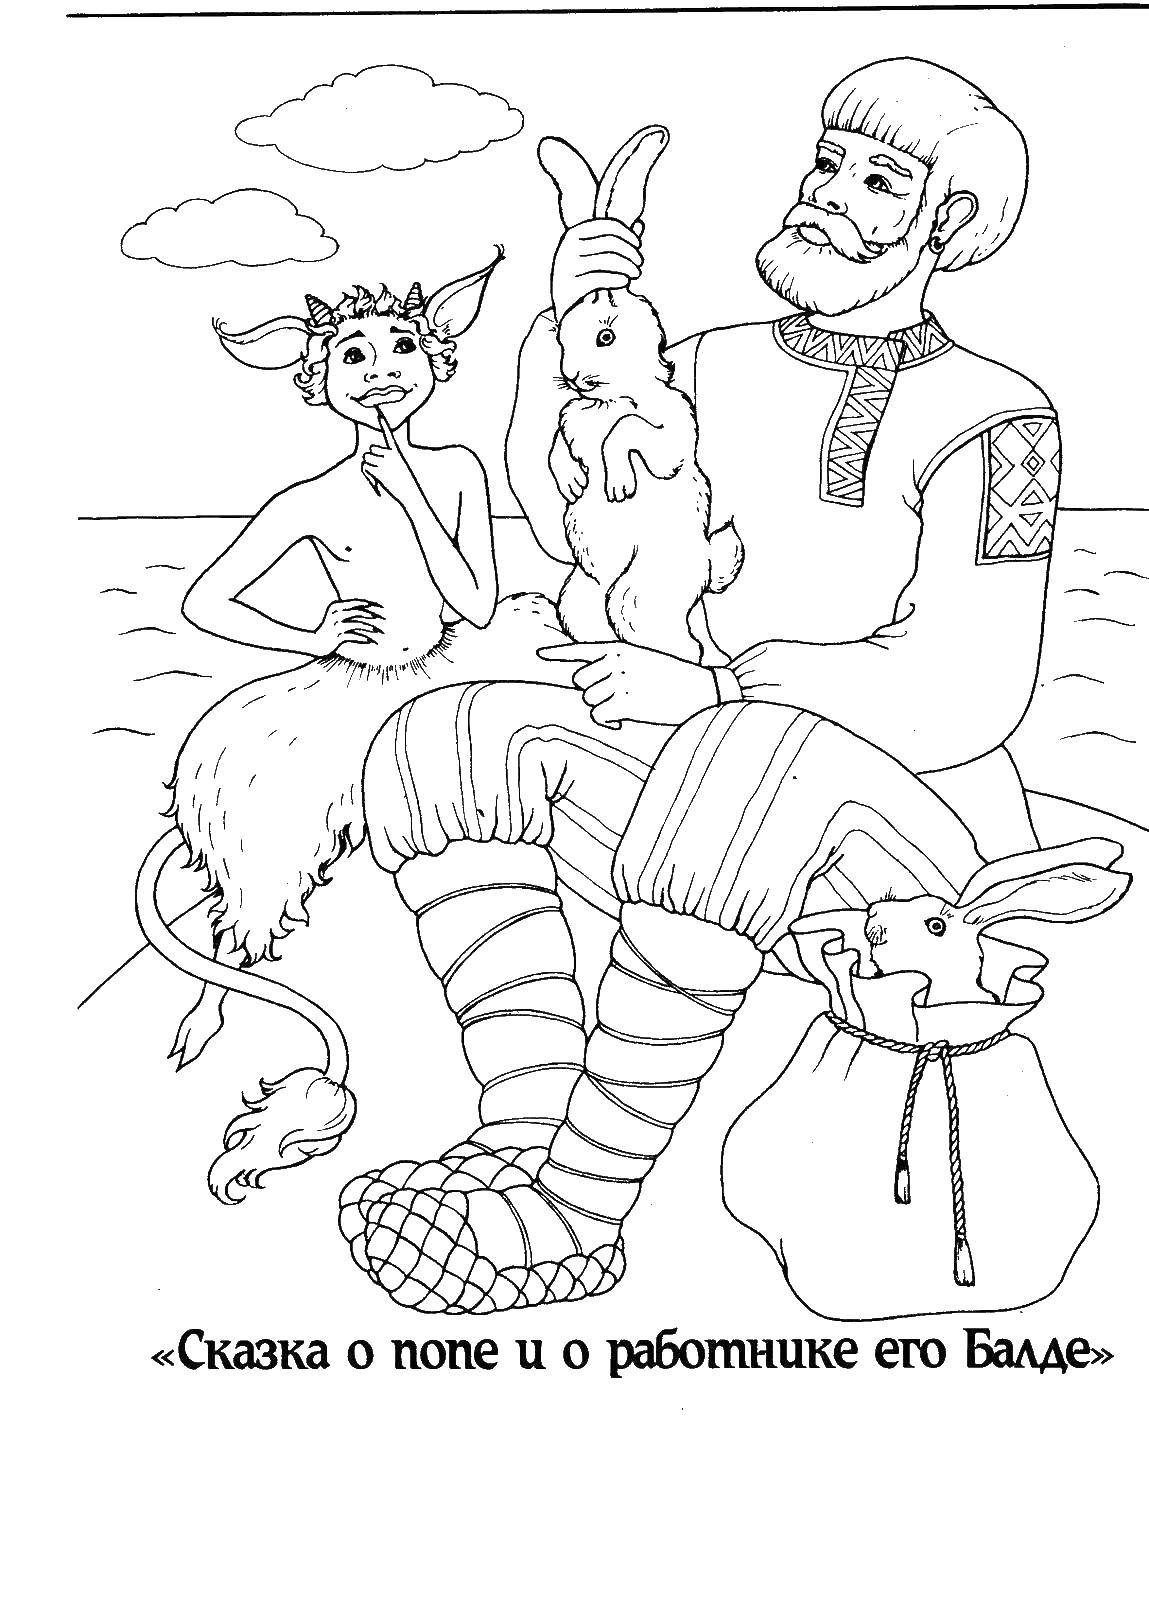 Coloring Balda caught rabbits. Category Fairy tales. Tags:  Pop, a worker, Balda.